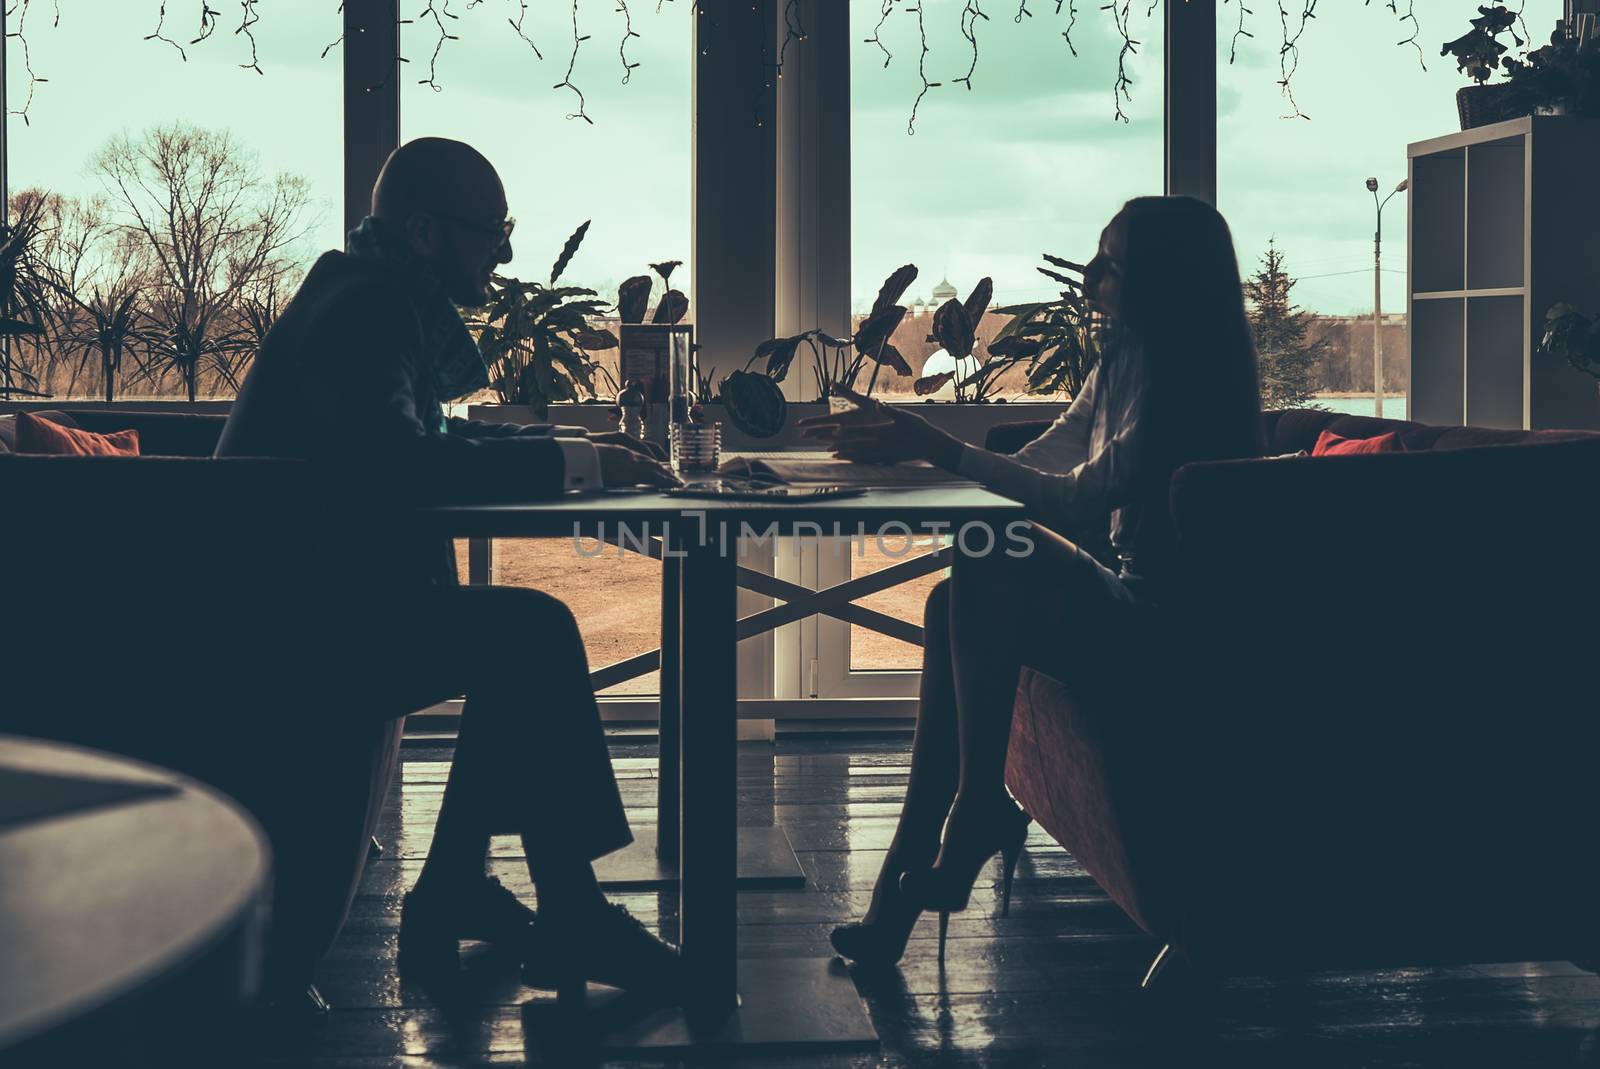 The silhouette of the love couple sitting at table in a cafe